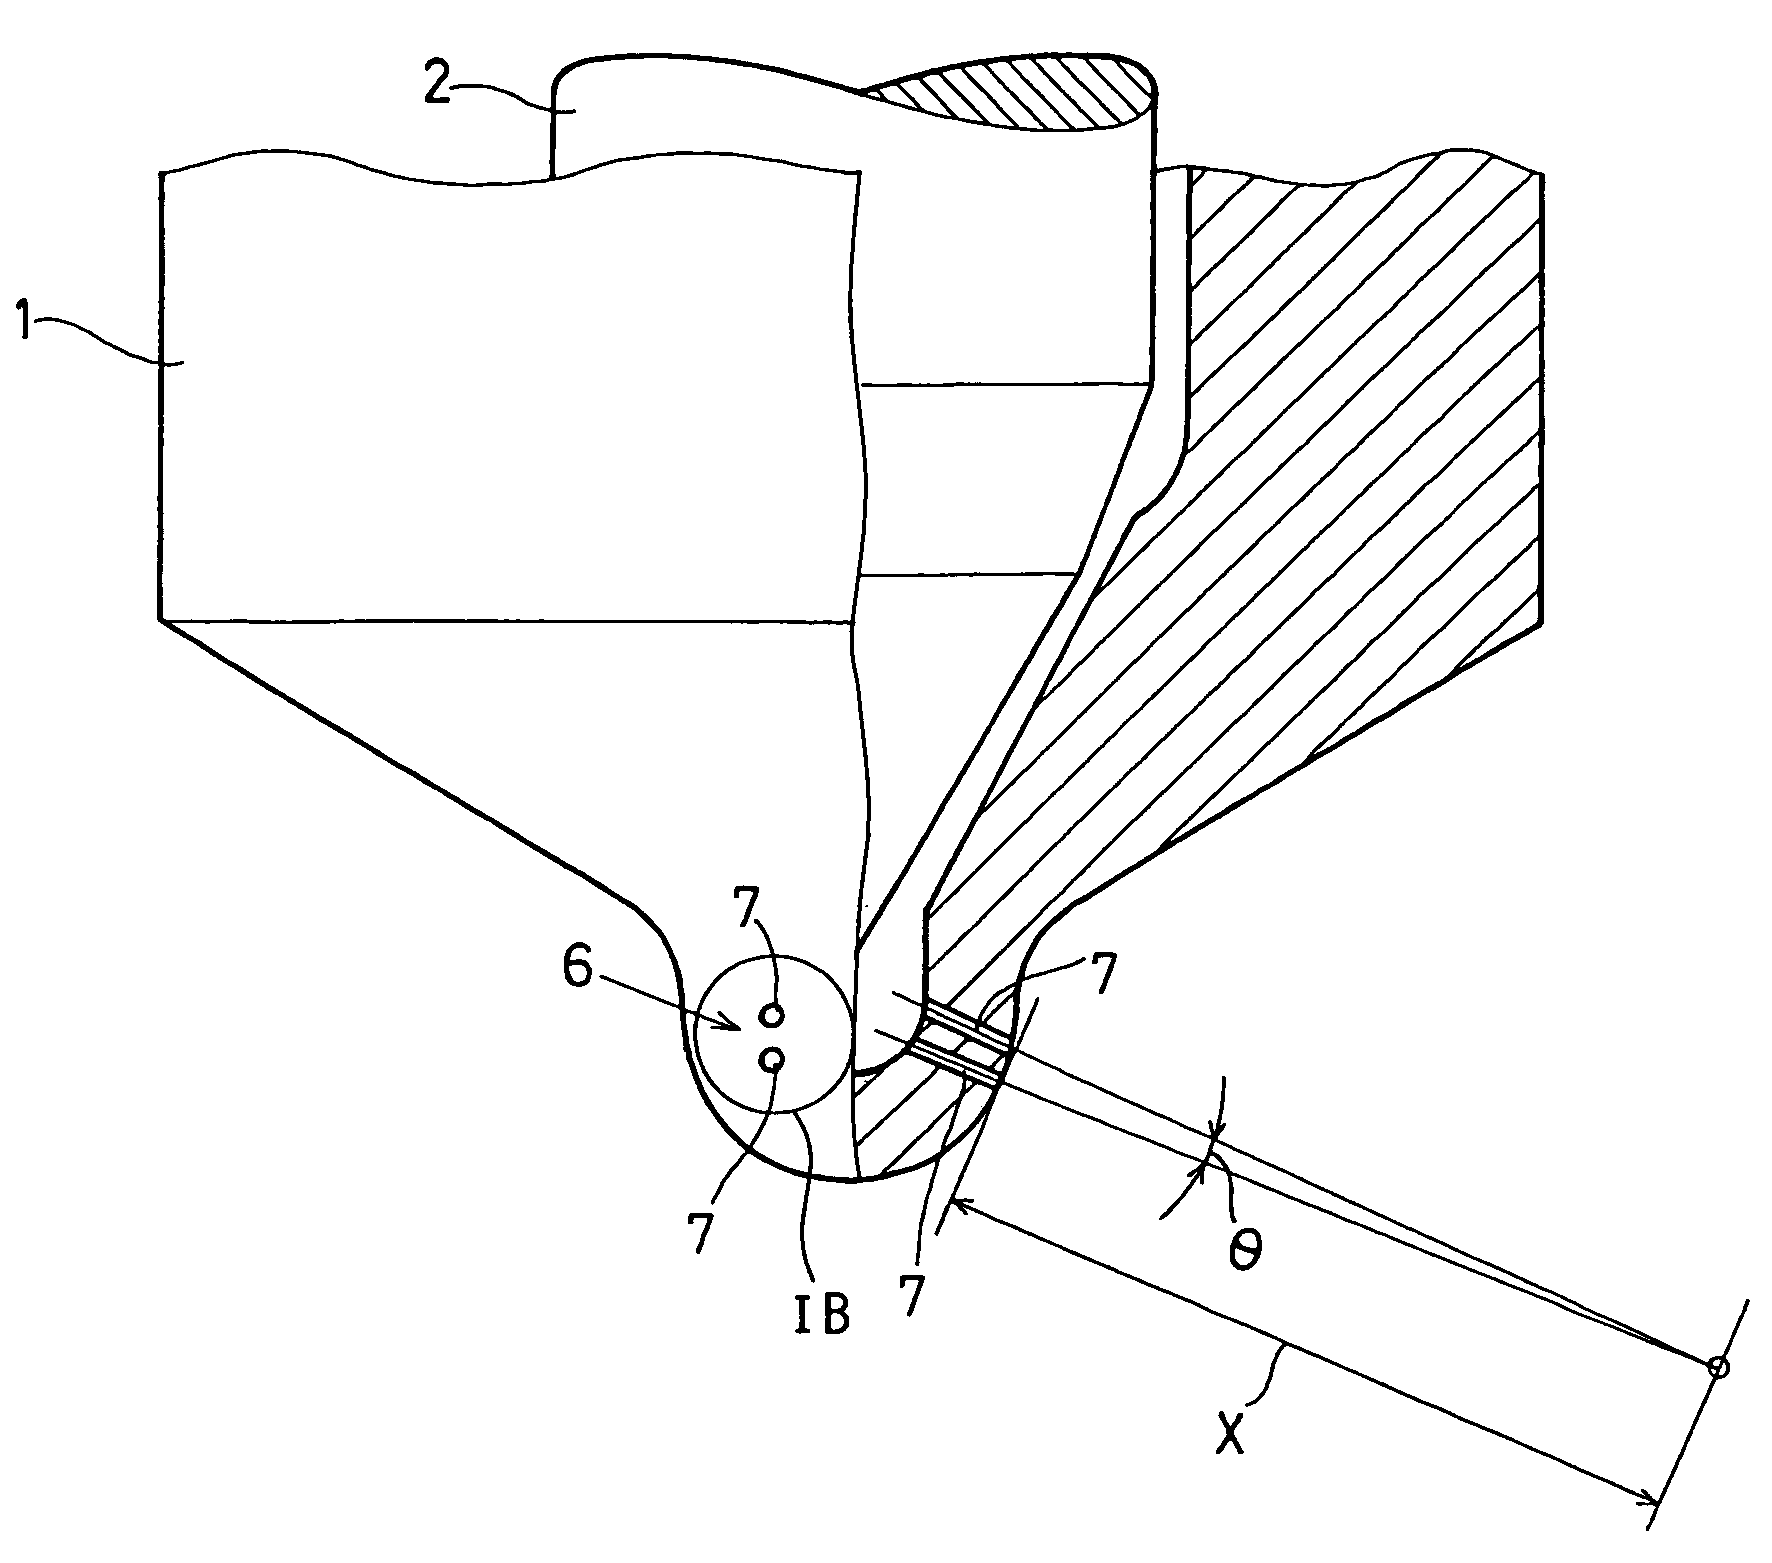 Fuel injection nozzle having multiple injection holes